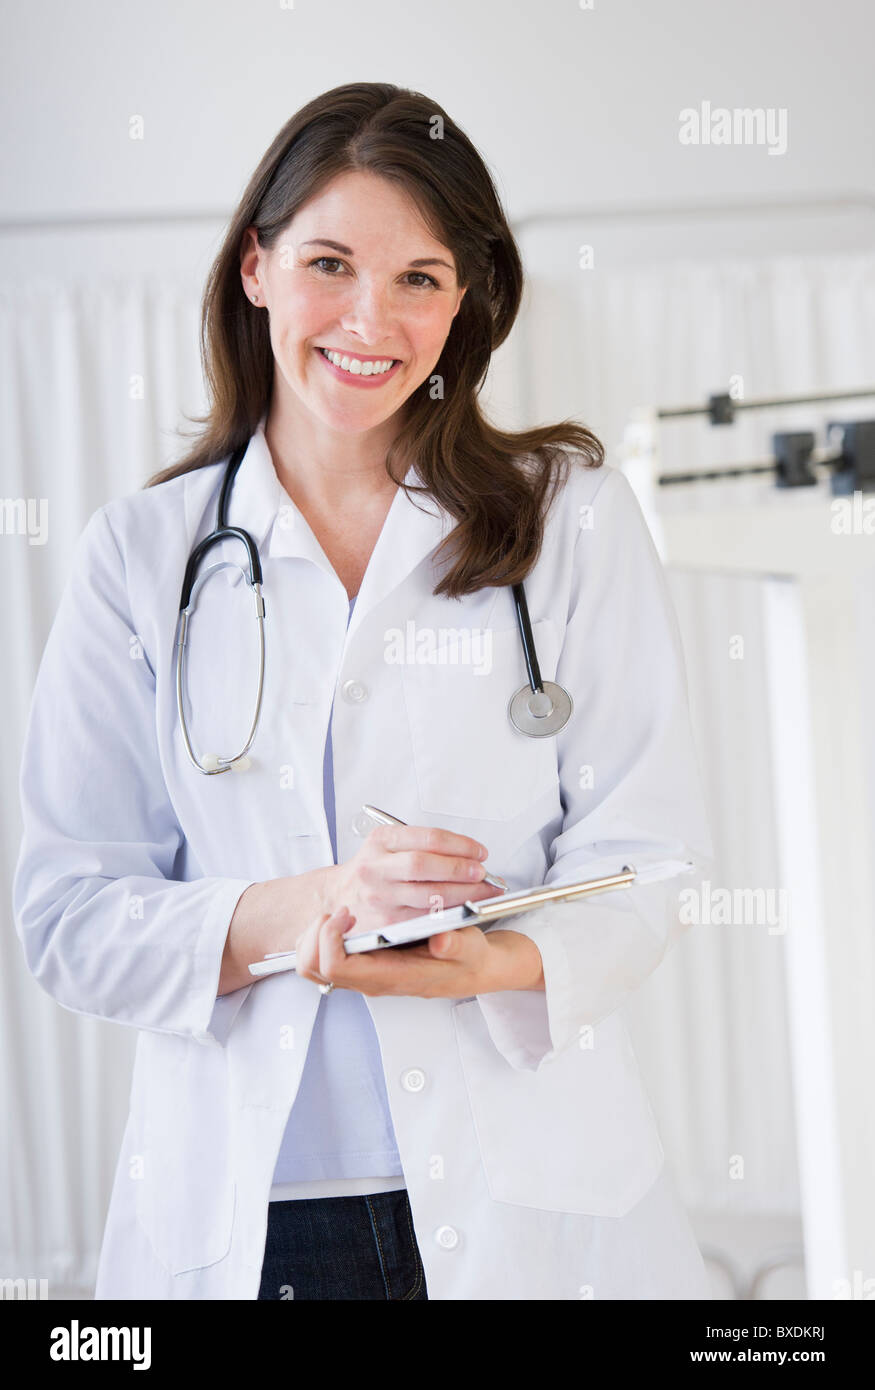 Friendly doctor Stock Photo